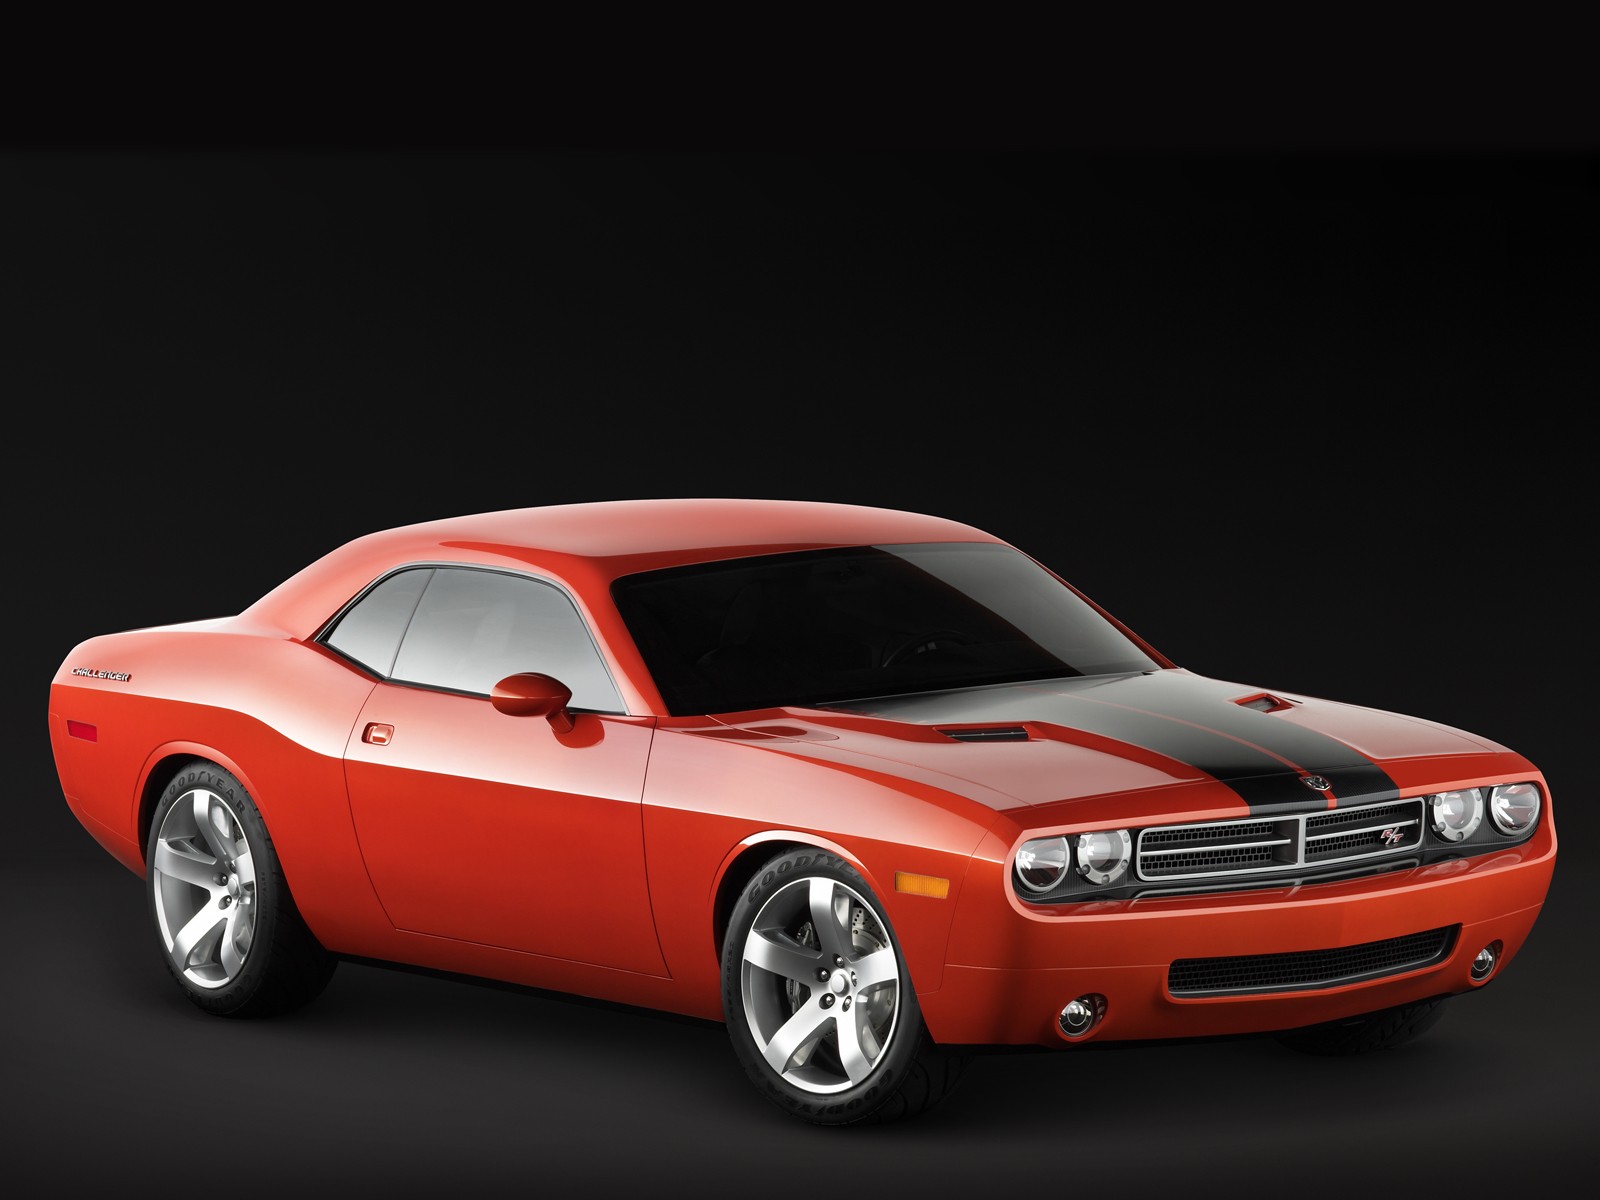 Top HD Red Cars Wallpaper That Will Make Your Desktop